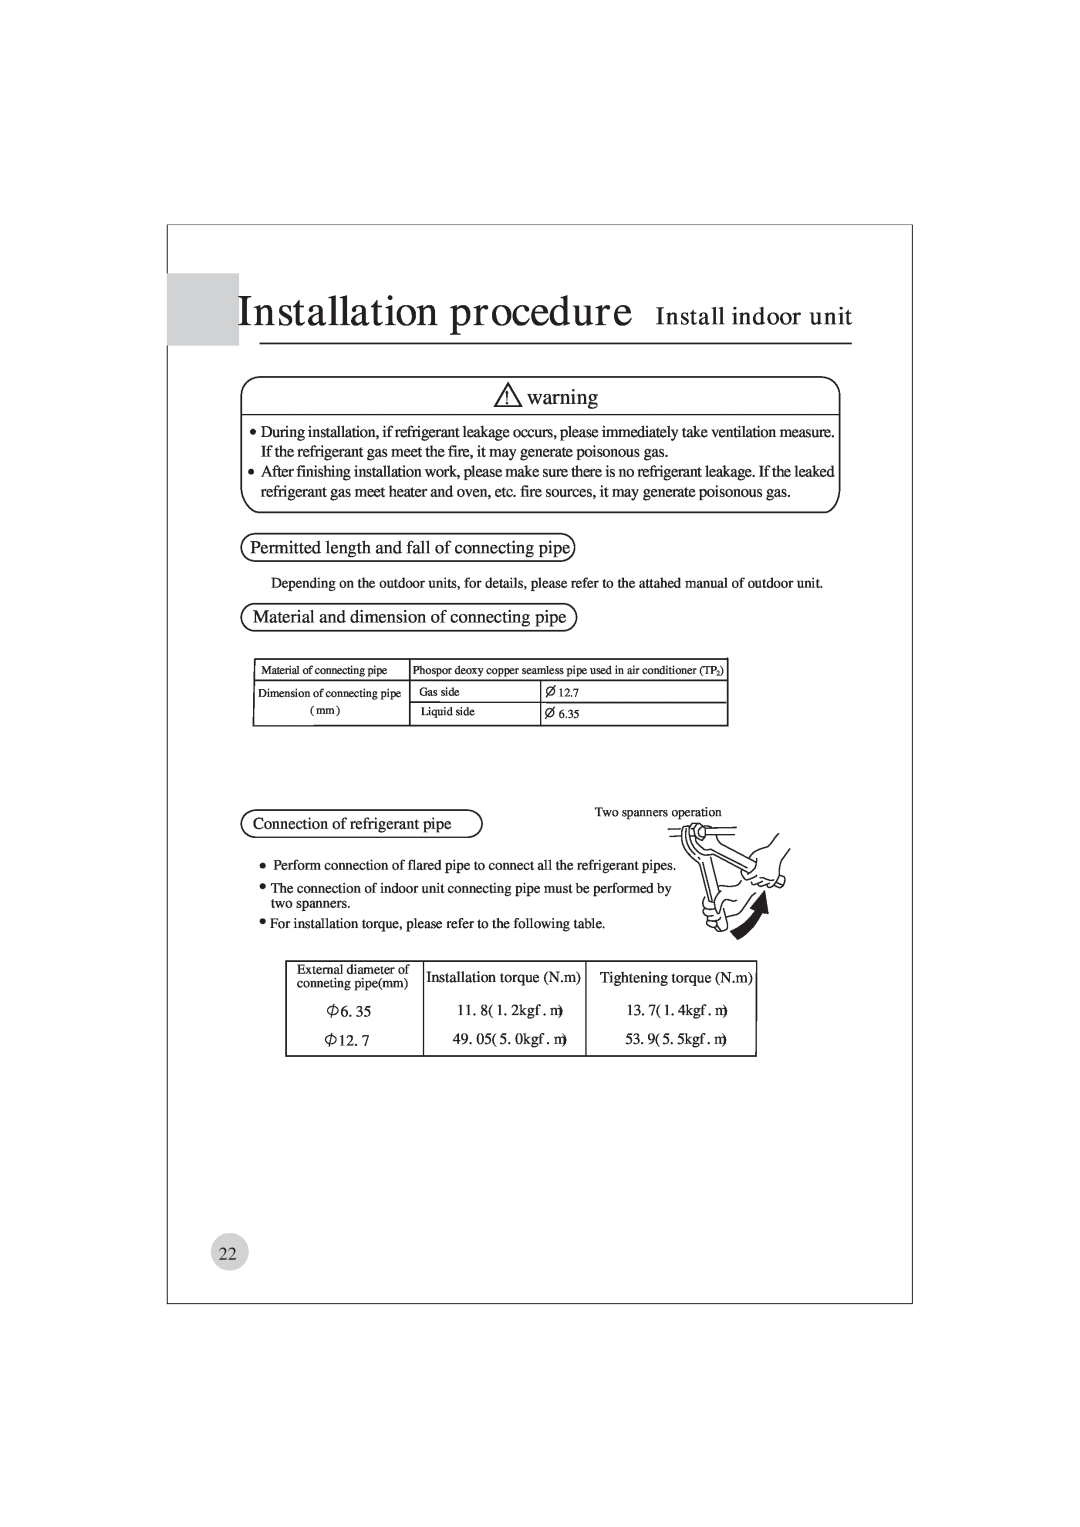 Haier AE122BCAAA (H2EM-18H03) Installation procedure Install indoor unit, Permitted length and fall of connecting pipe 